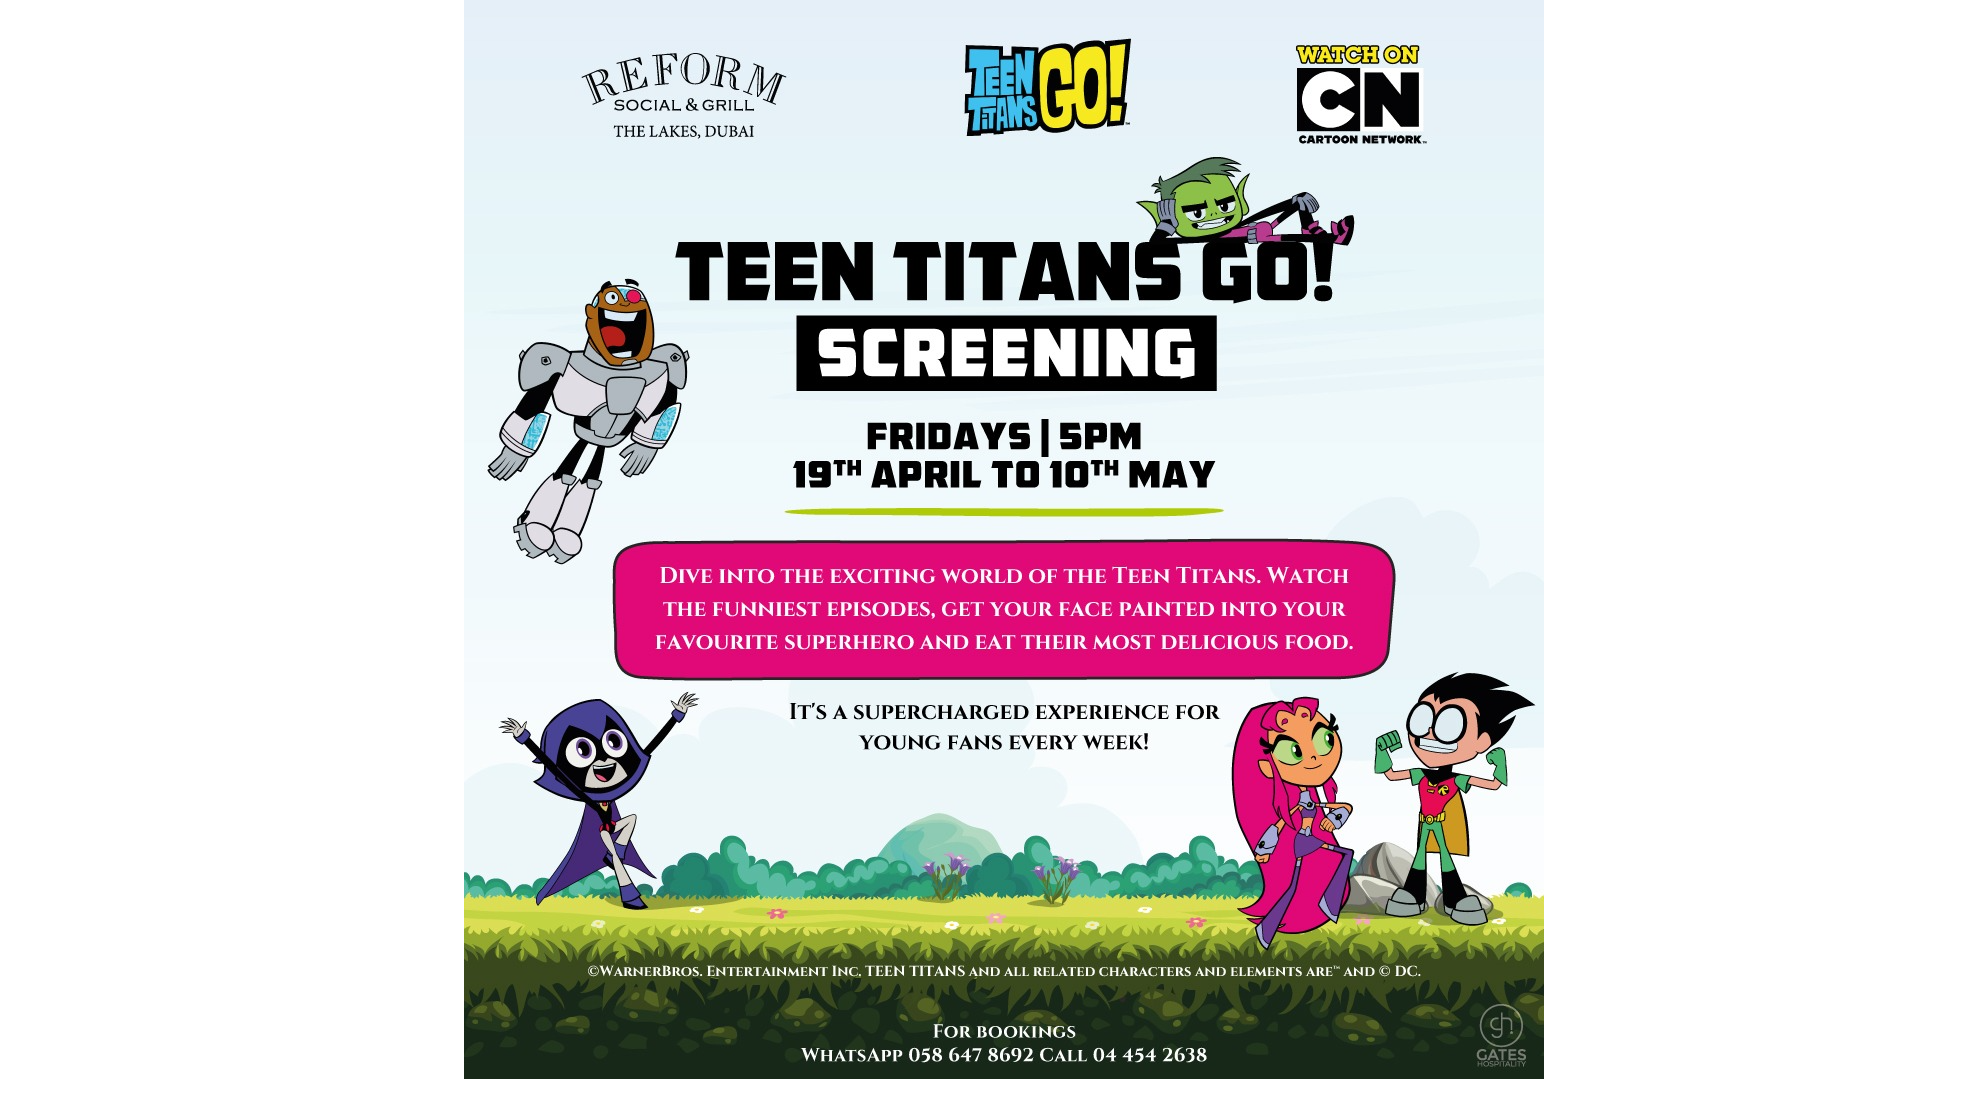 https://adgully.me/post/6273/cartoon-network-menas-teen-titans-go-teams-up-with-reform-social-grill